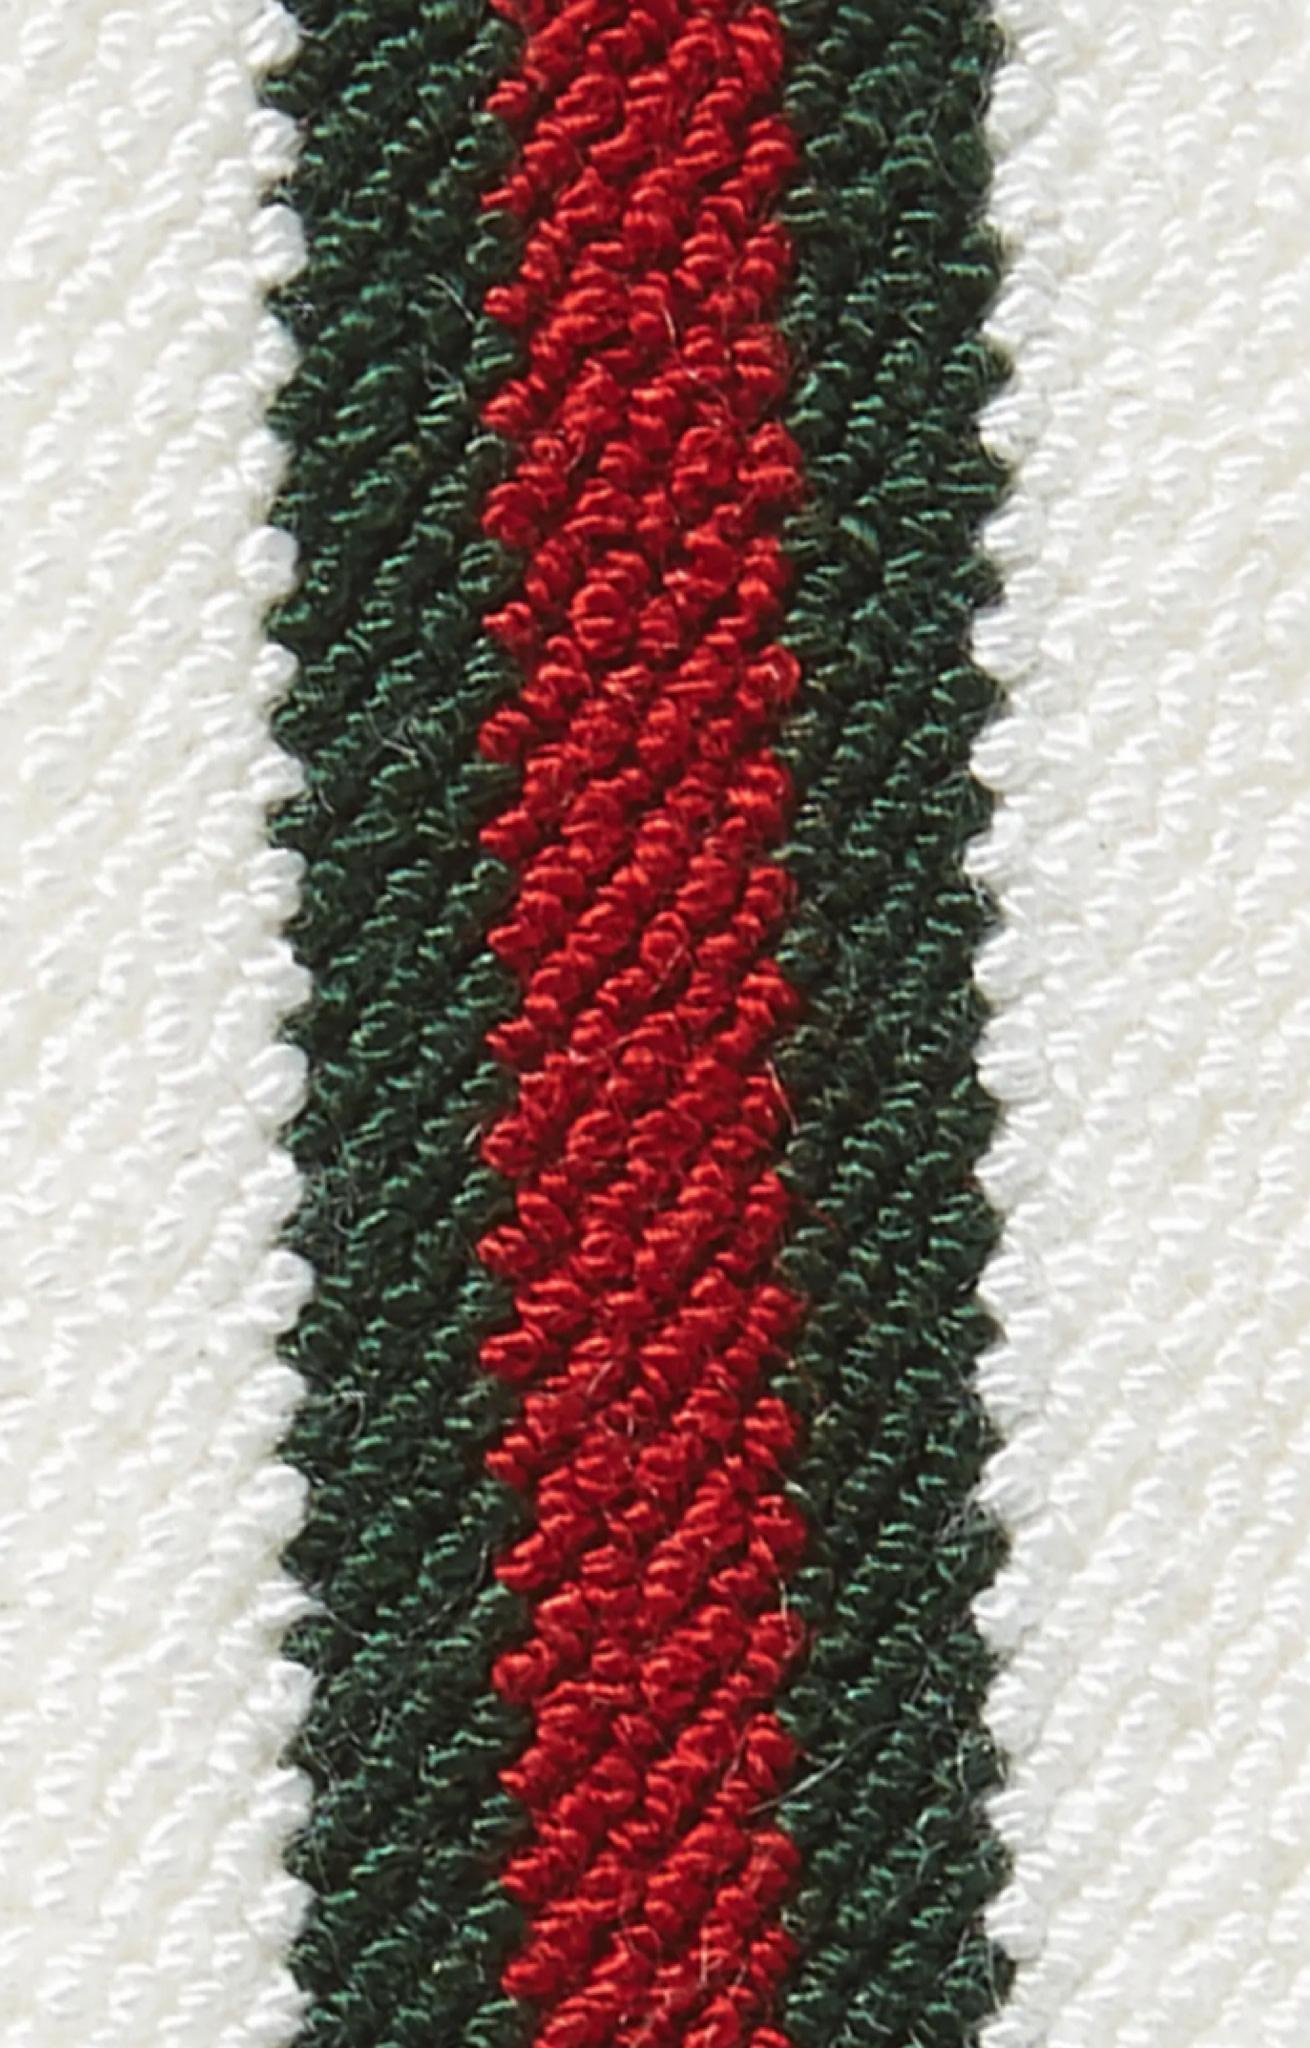 This white elastic headband features a vintage effect Gucci web stripe in red and green.

COLOR: White/Green/Red
ITEM CODE: 746045 
MATERIAL: Sythentic (Viscose/elastane)
MEASURES:  24 x 4 cm
COMES WITH: Tags
CONDITION: Brand new

Made in